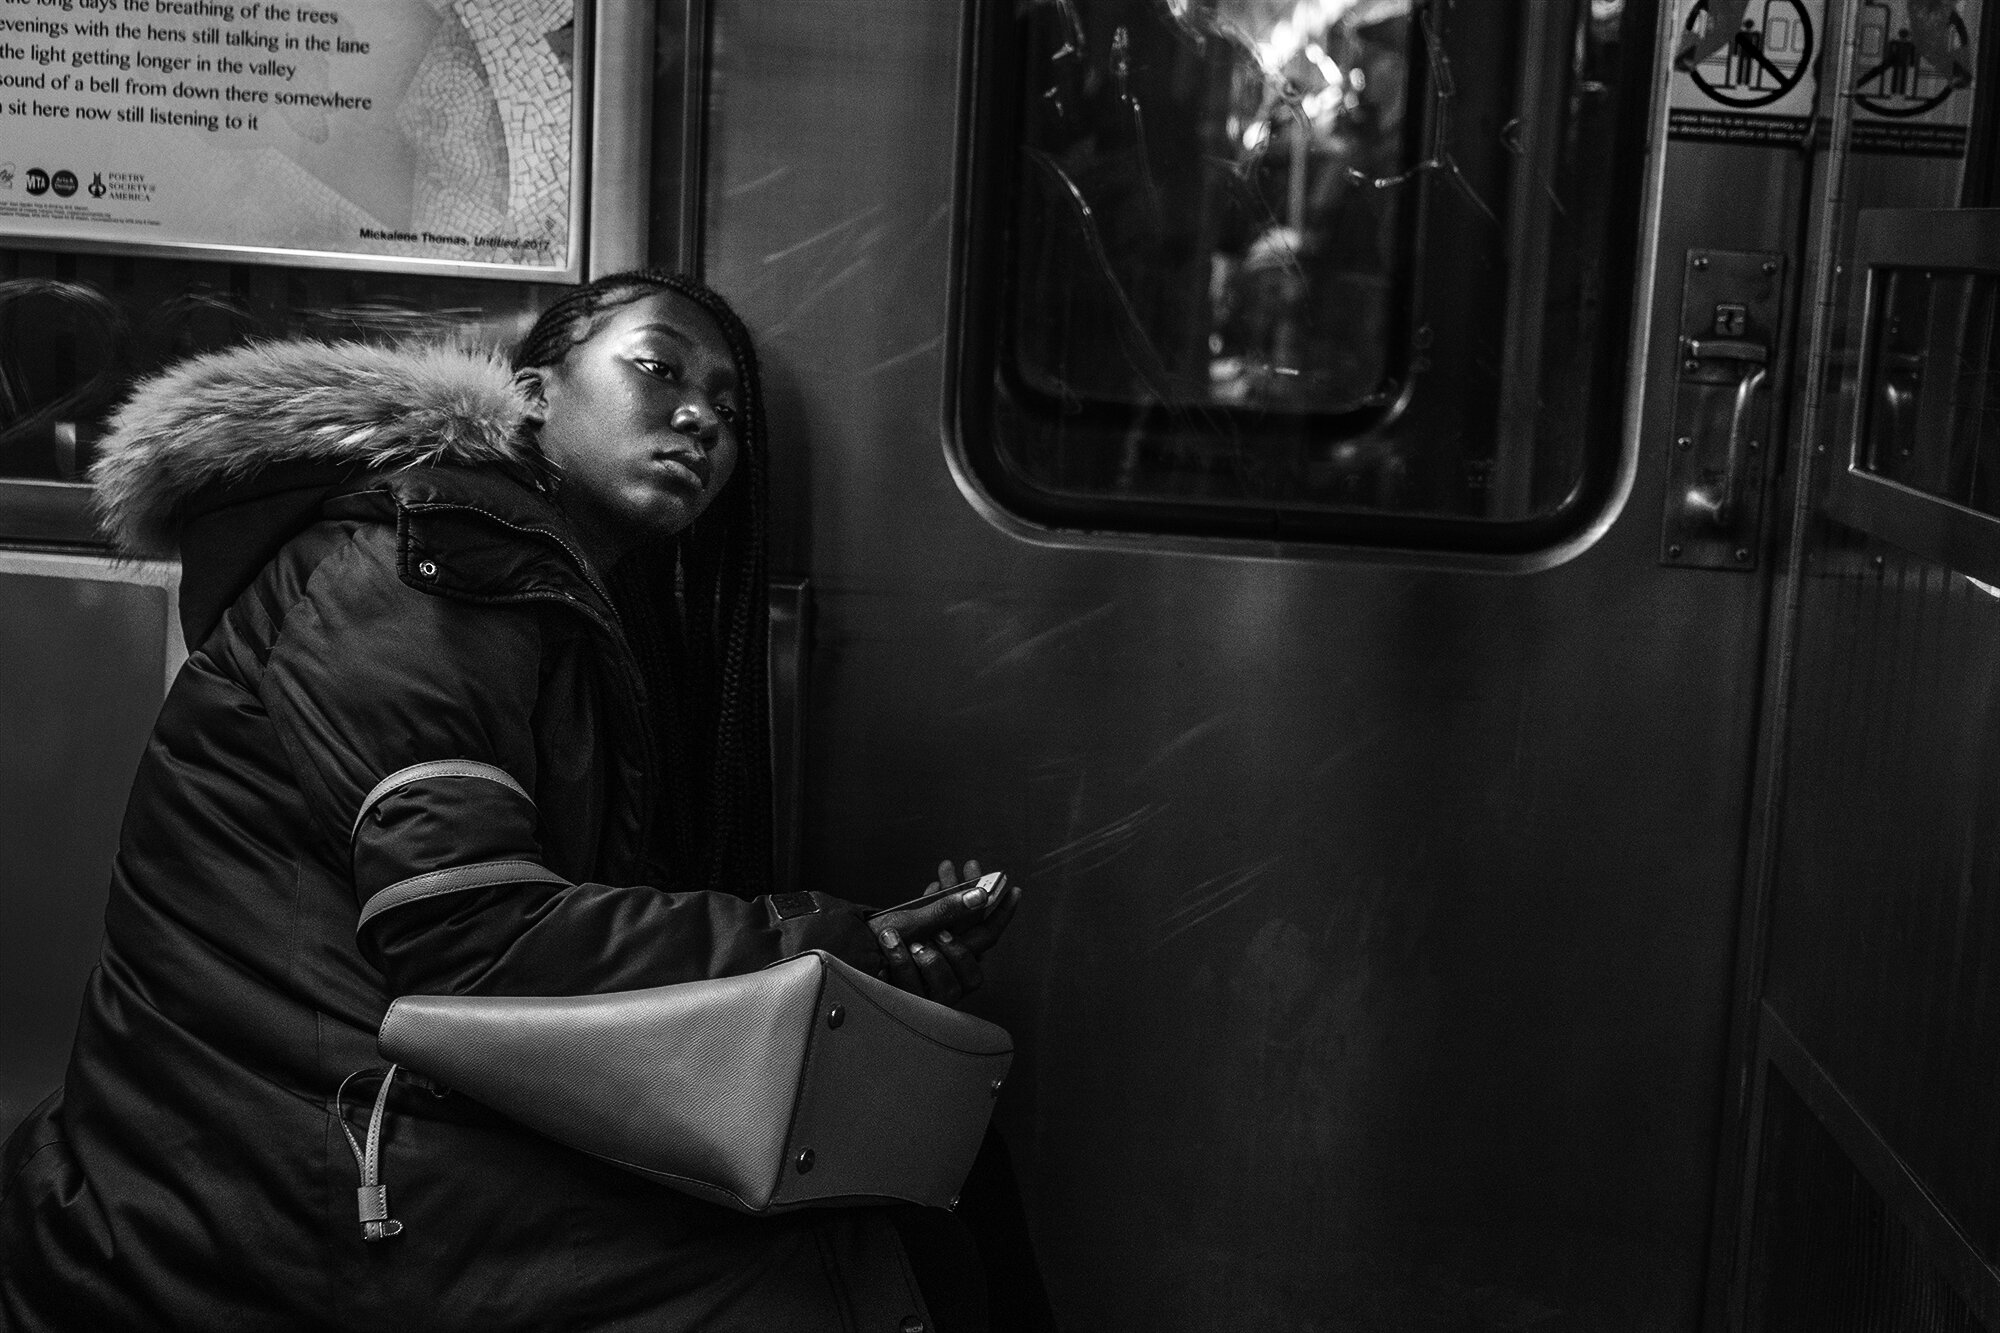 Brklyn_Subway_2018_Young_Lady_Day_Dreaming-008crp.jpg